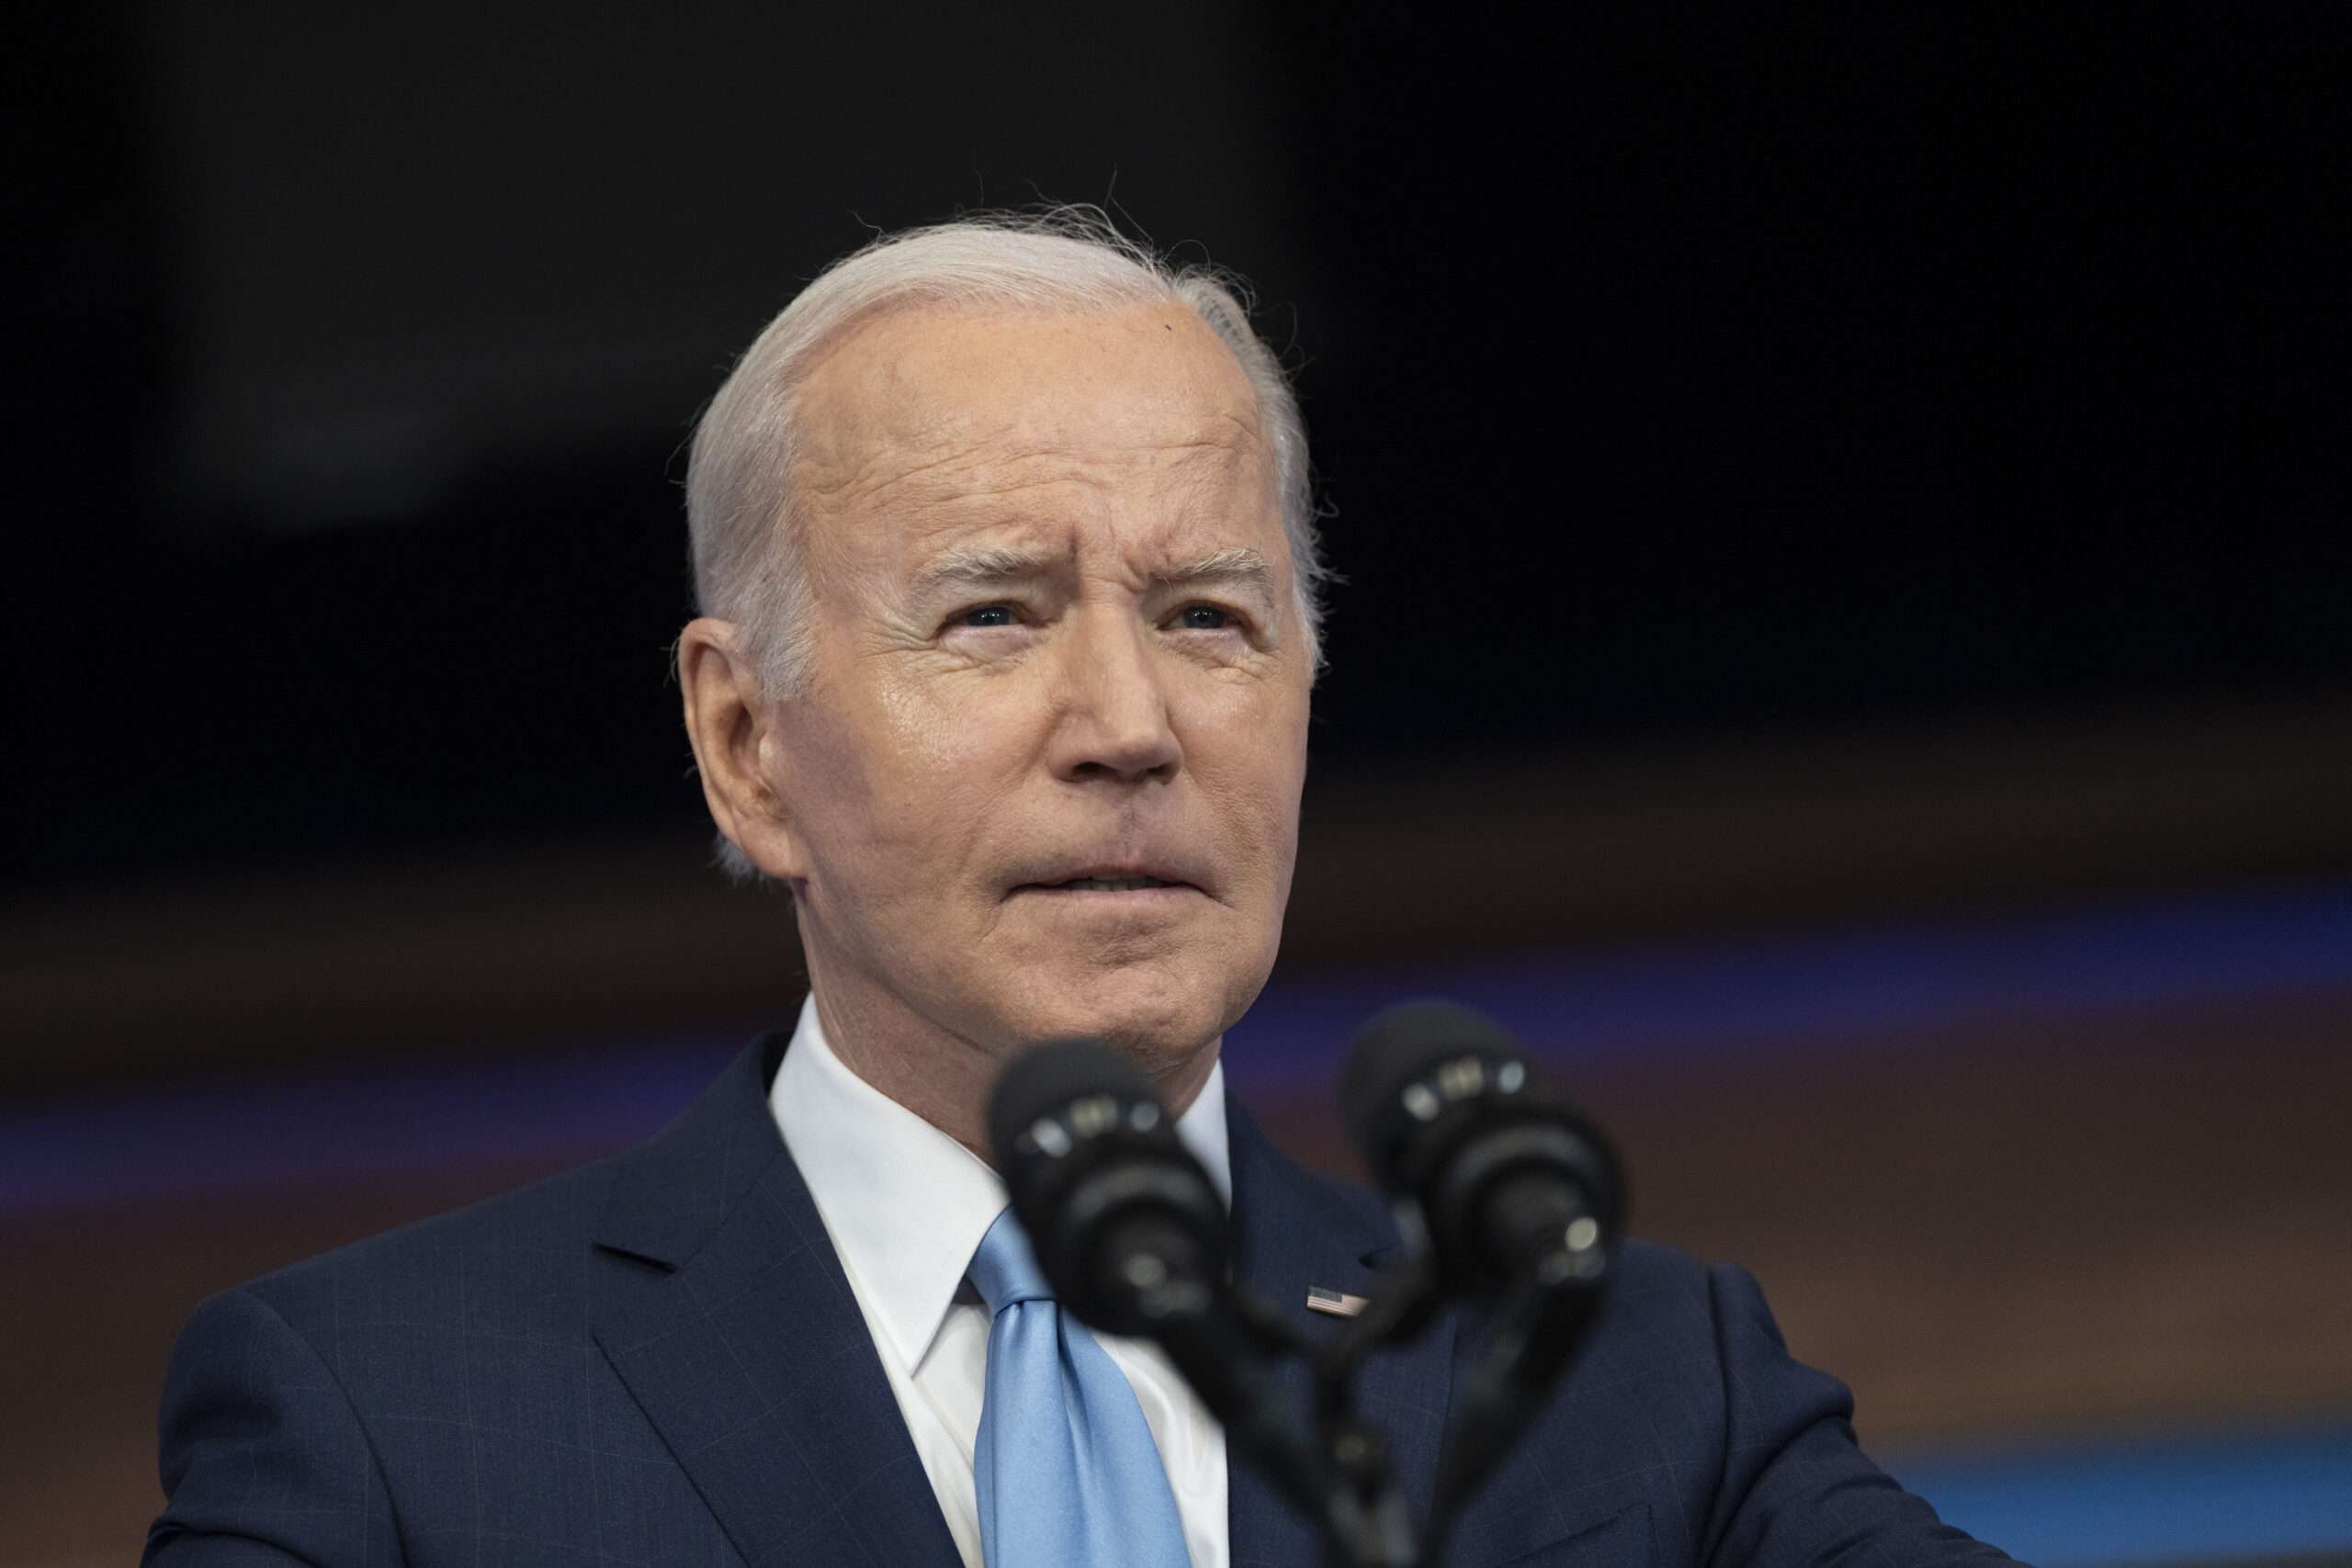 Joe Biden’s Email Aliases Are a Transparency Problem